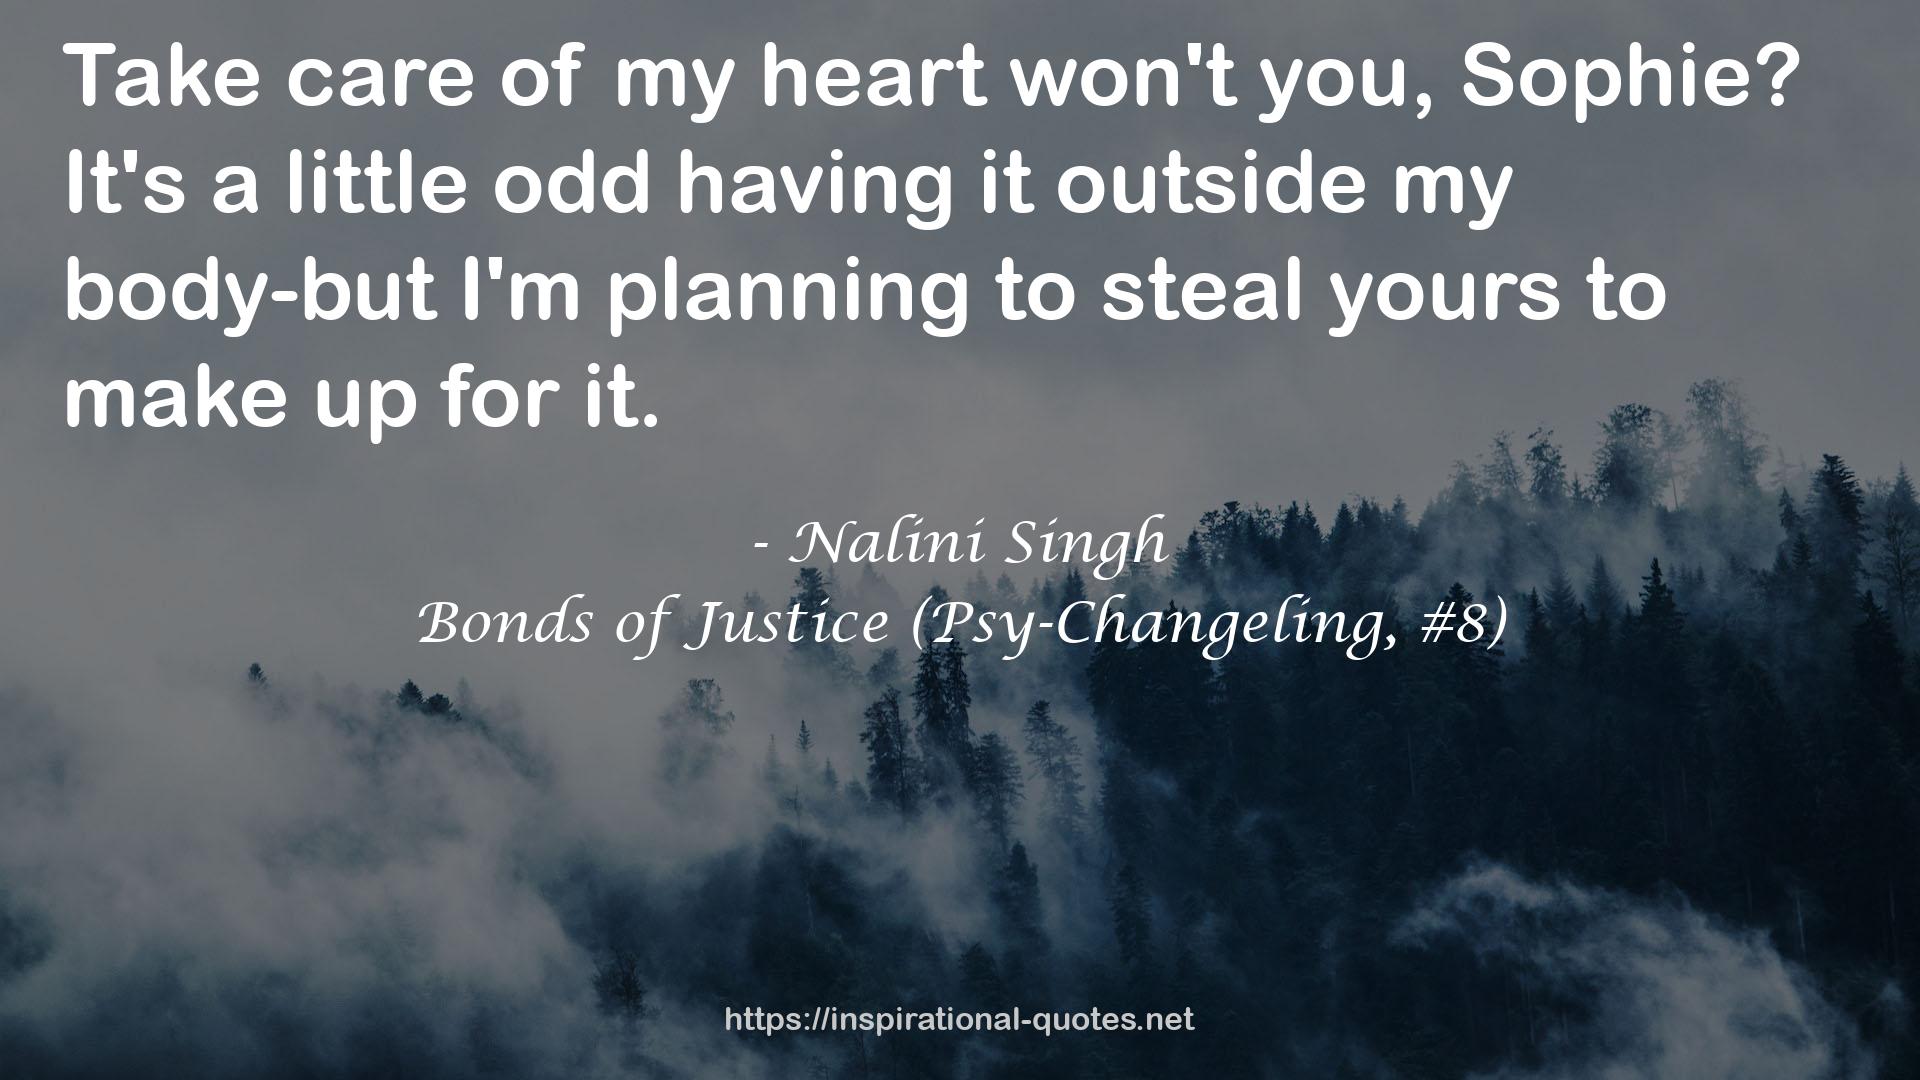 Bonds of Justice (Psy-Changeling, #8) QUOTES